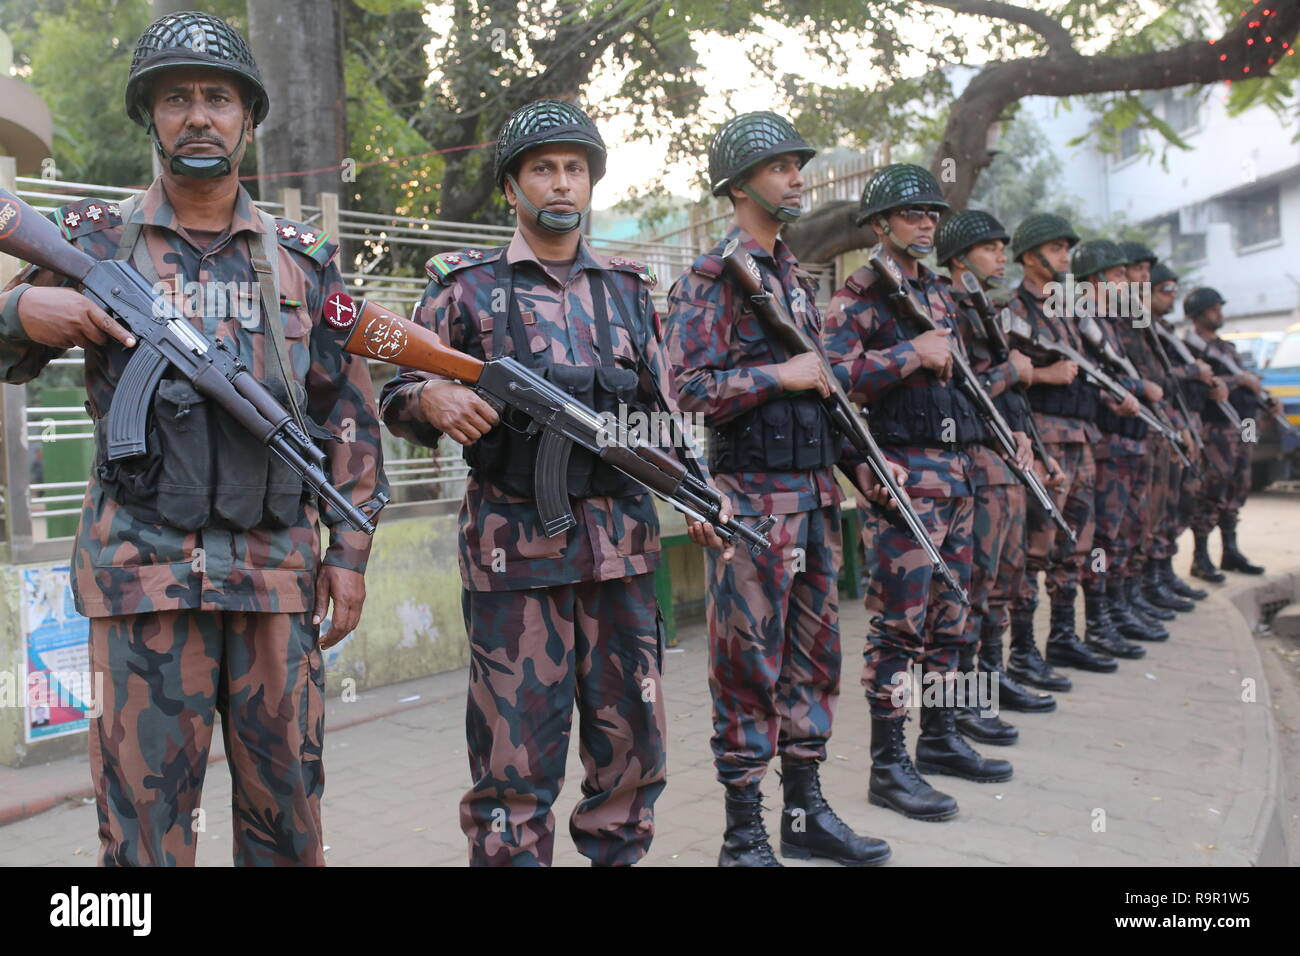 Dhaka, Bangladesh: Members of Border Guard Bangladesh (BGB) stand guard on a street ahead of the general election in Dhaka, Bangladesh on December 26, 2018. More than 100 million people are expected to cast their votes in the upcoming general election which will be held on December 30, 2018. © Rehman Asad / Alamy Stock Photo Stock Photo